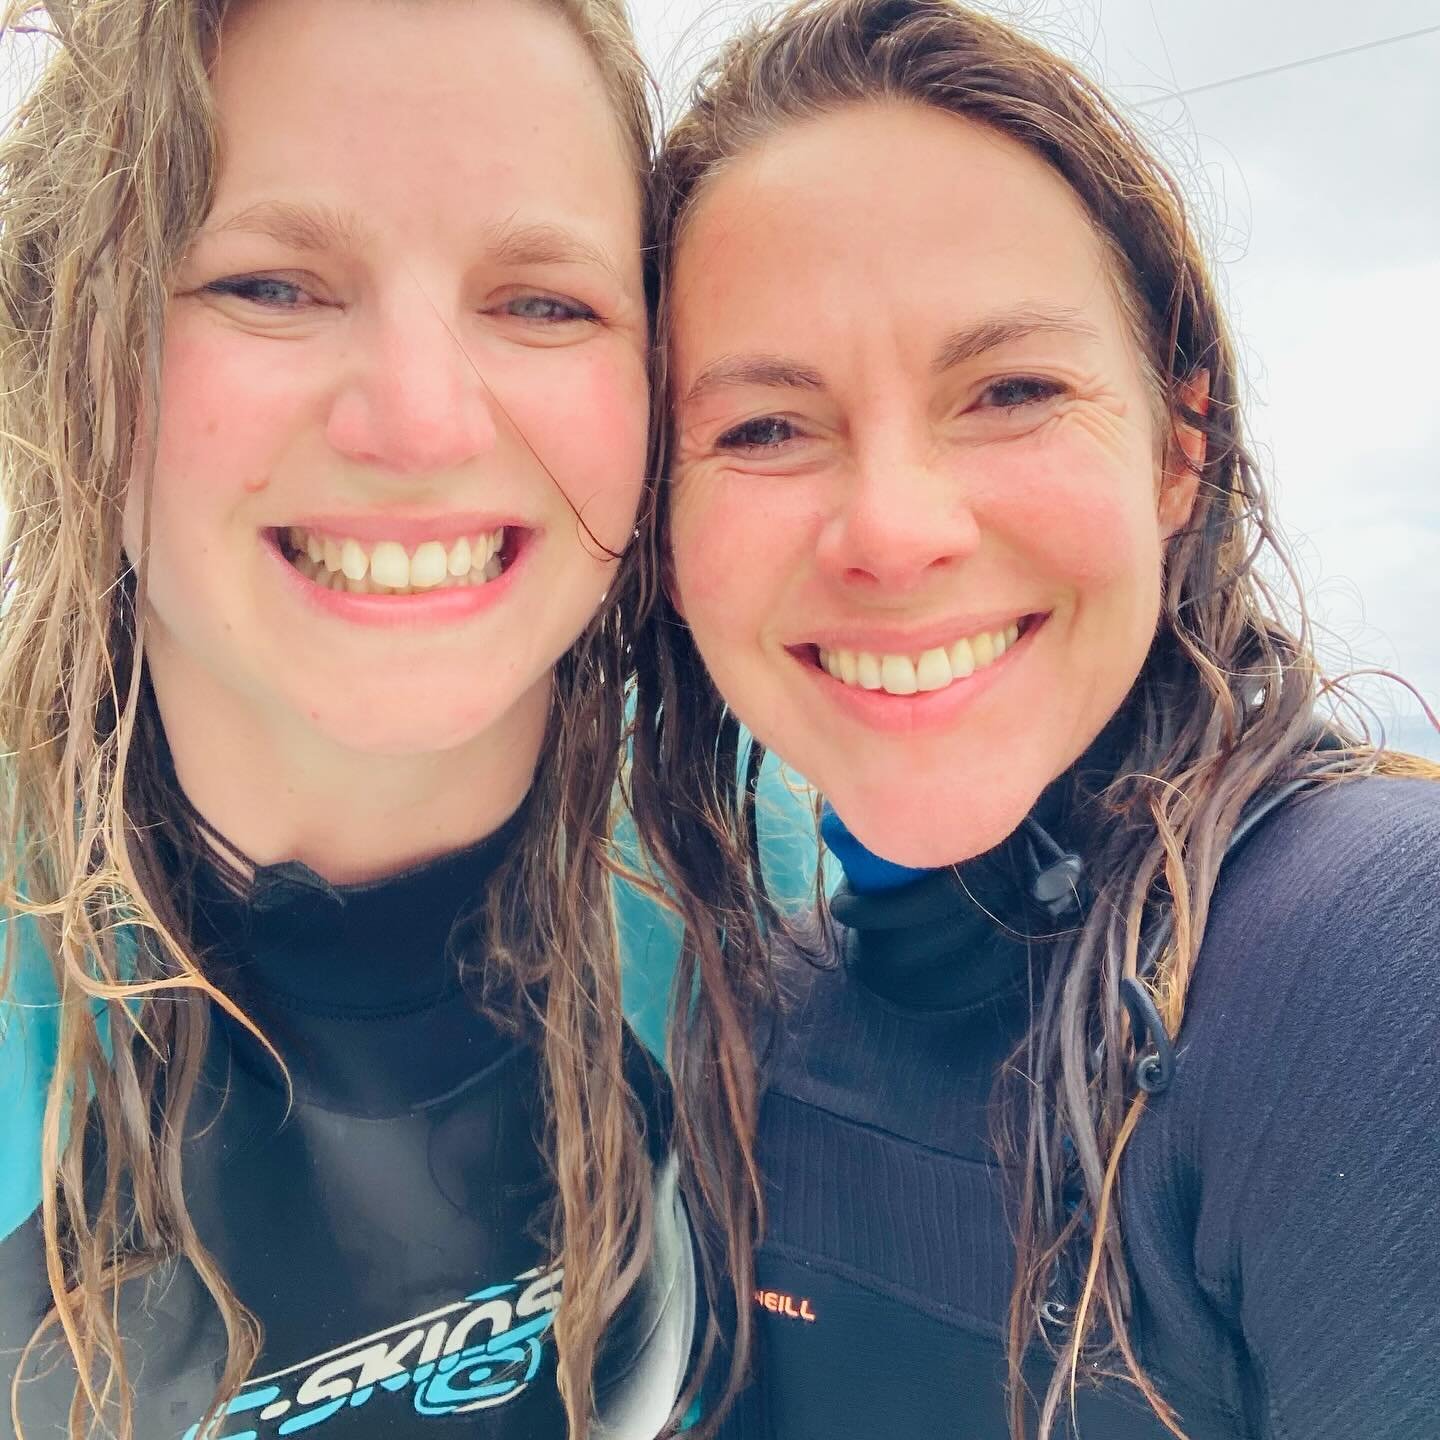 Waves and words, words and waves 🌊✍️ That&rsquo;s what @lucyclarke_author and I out for on this retreat 🥳 There&rsquo;s nothing better than running into the sea after a long stint at the writing desk (even when it&rsquo;s THE most stunningly situat